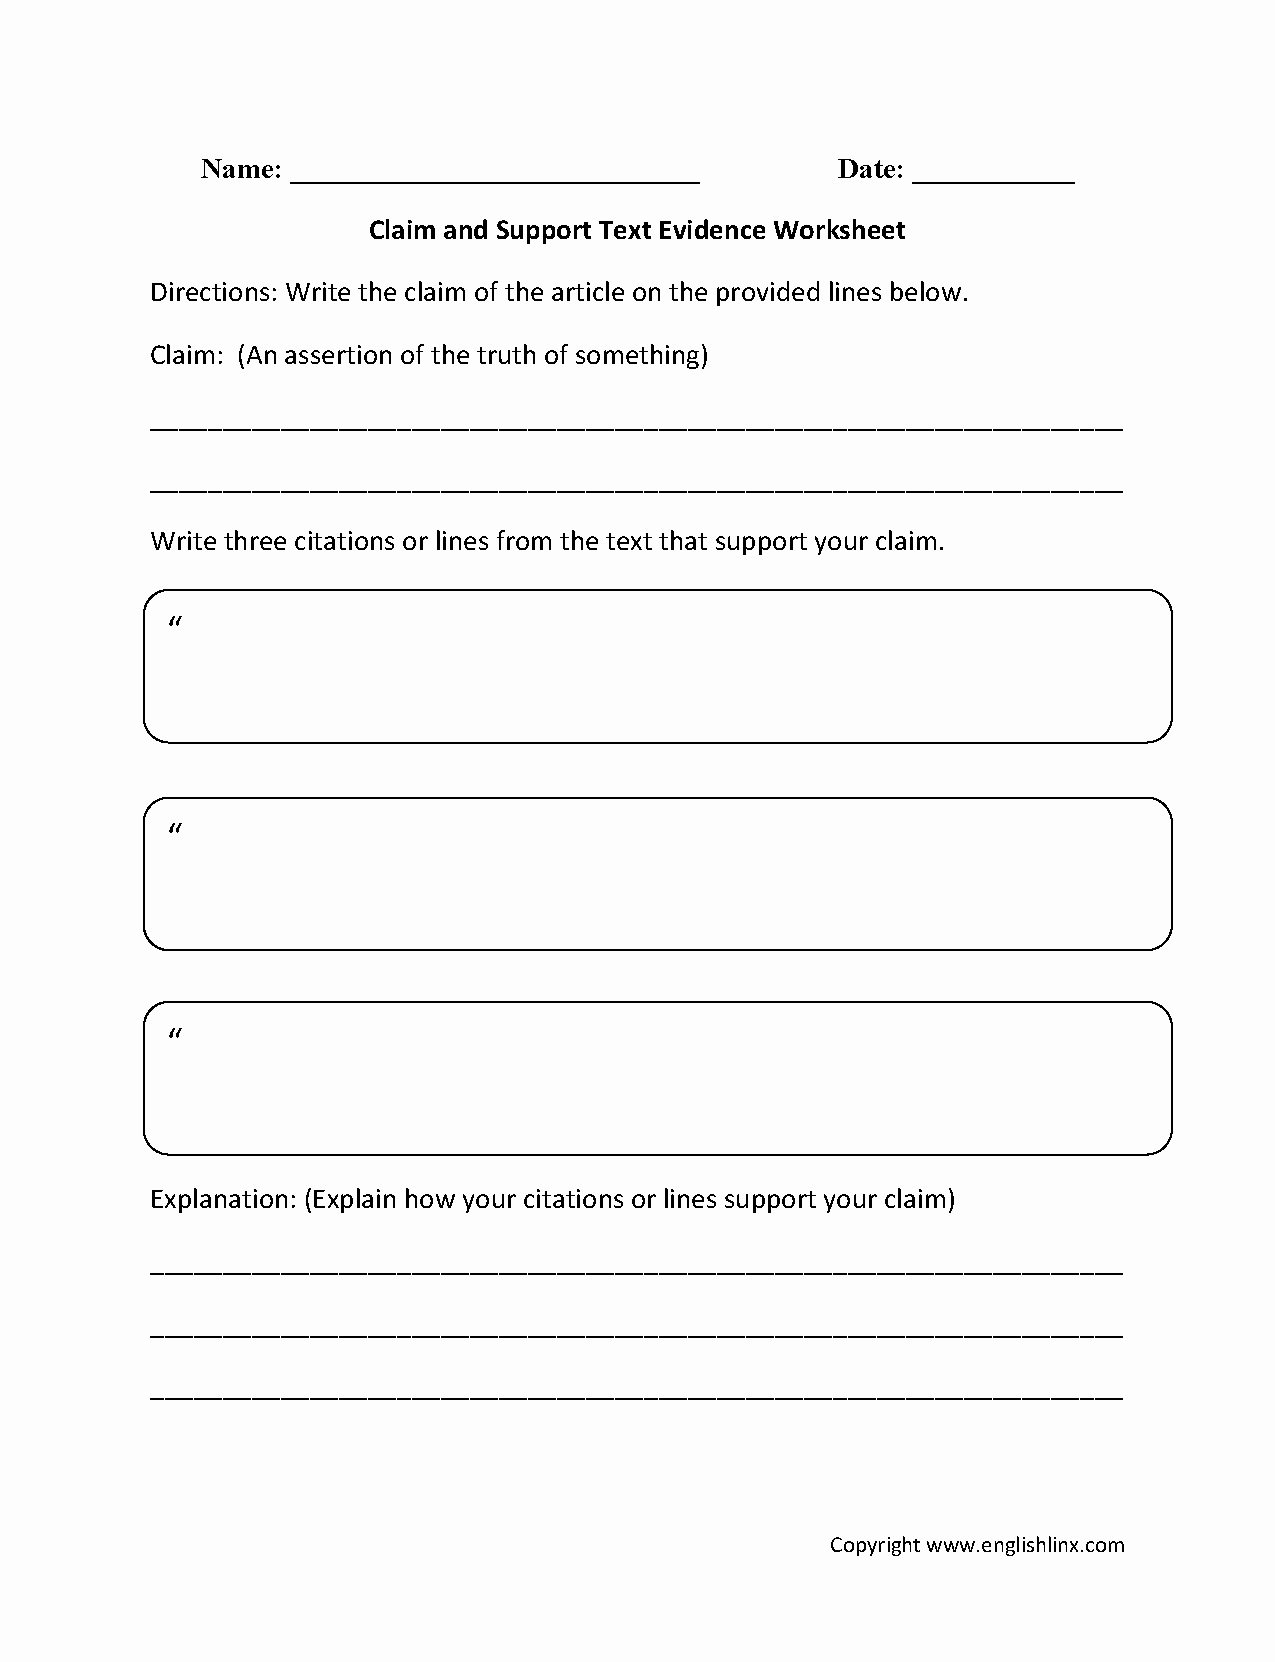 Citing Textual Evidence Worksheet Unique Citing Textual Evidence Worksheet Geo Kids Activities